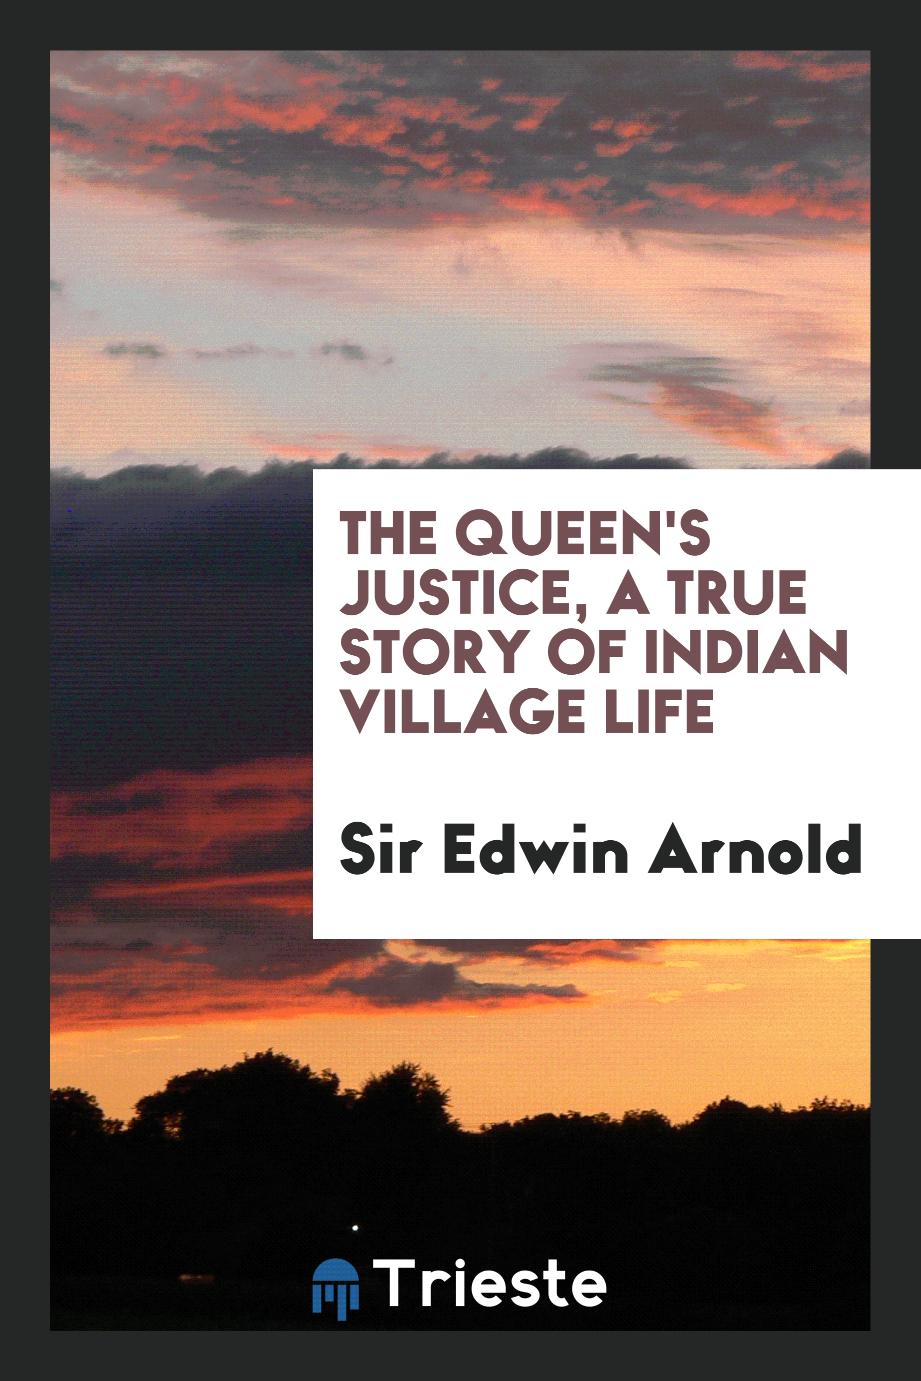 The Queen's justice, a true story of Indian village life